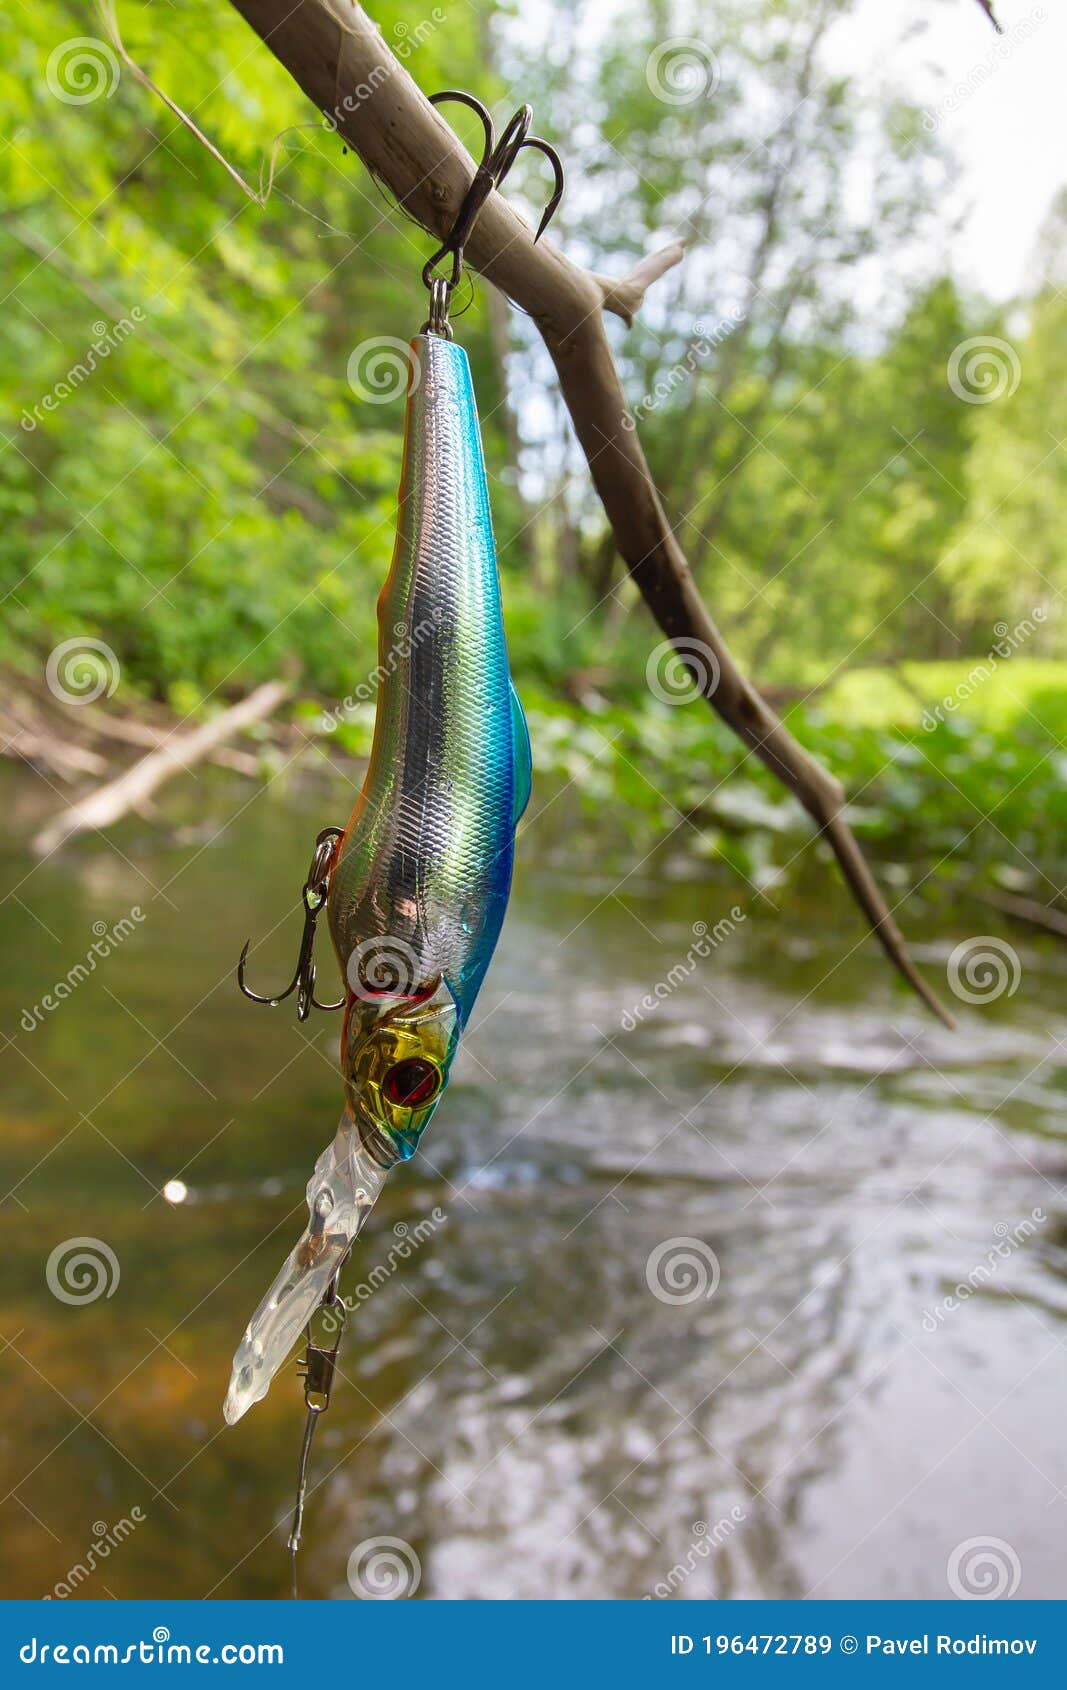 Fishing Bait Caught on a Tree Stock Image - Image of minnow, bait: 196472789